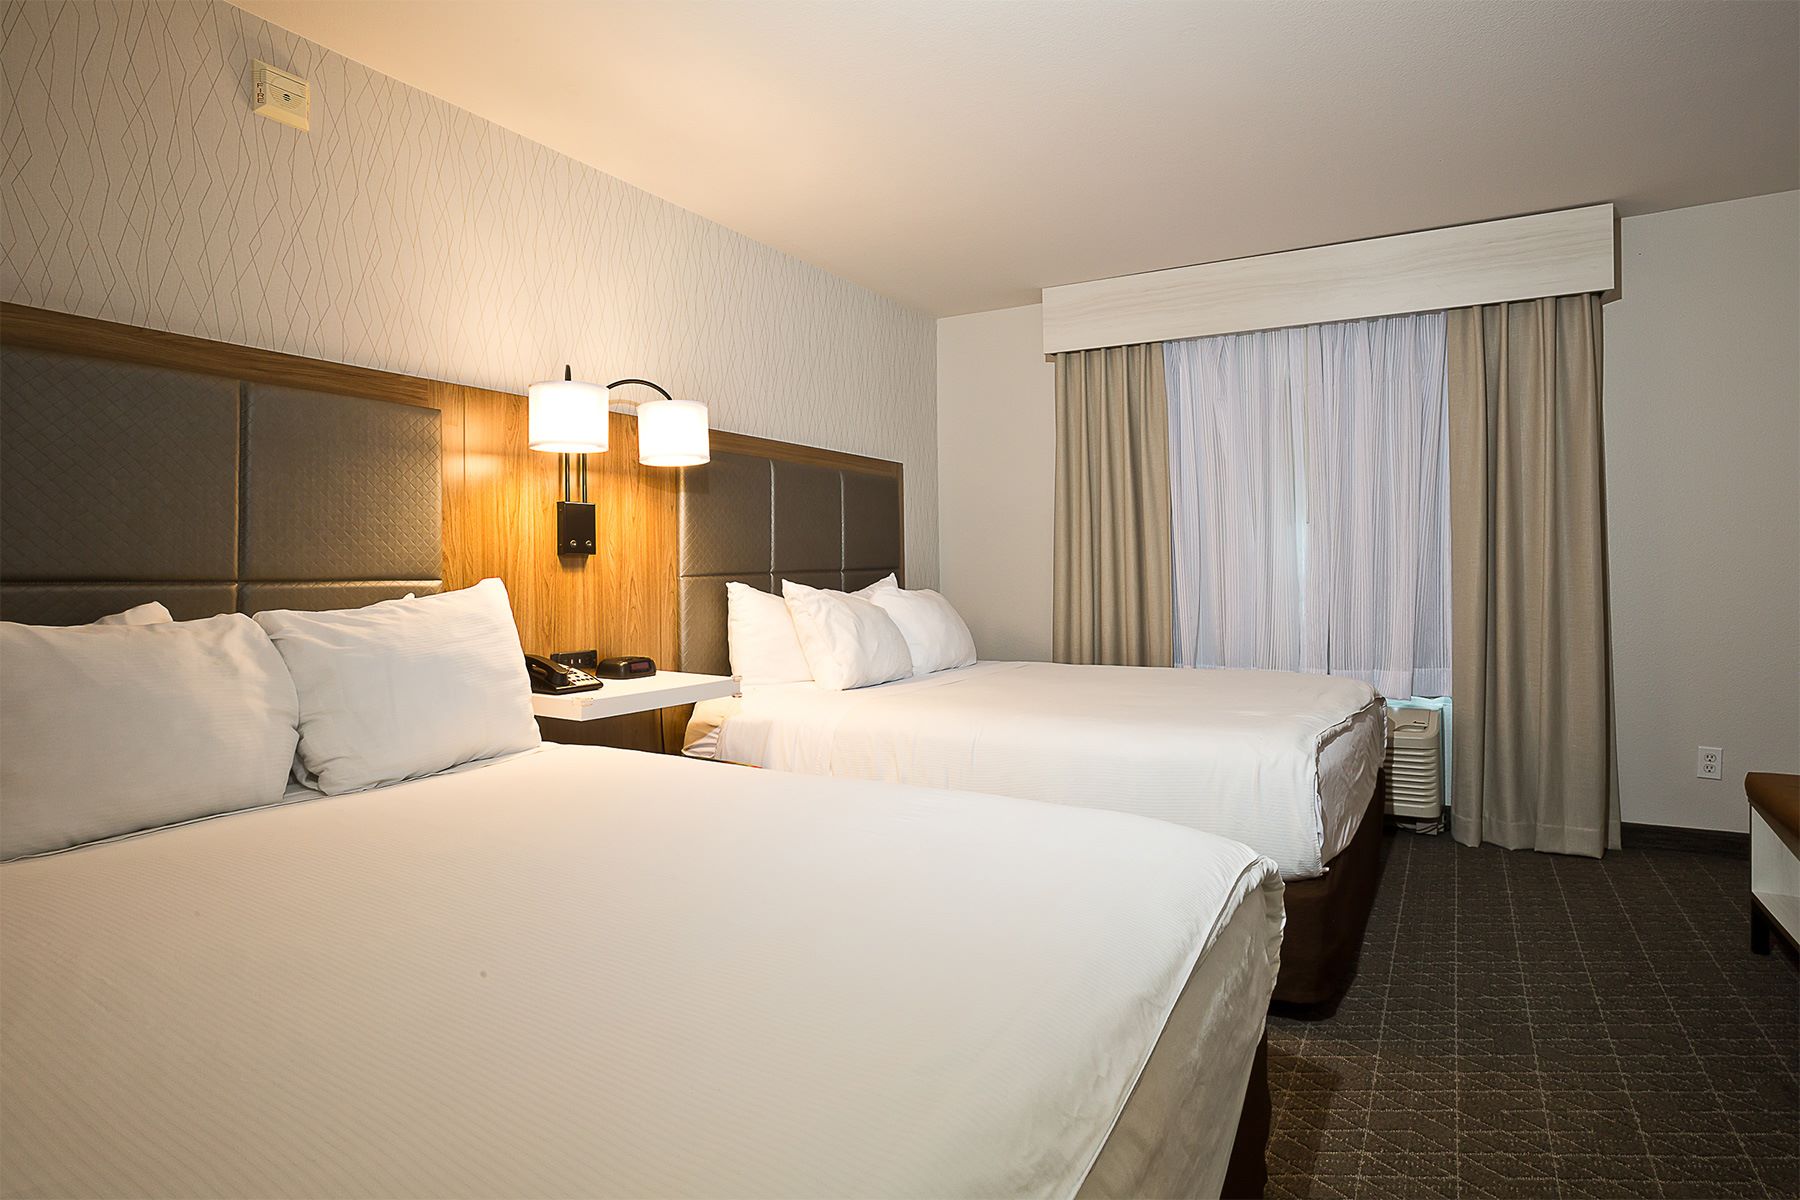 USS Hornet Hotel Package at Hawthorn Suites By Wyndham-Oakland/Alameda